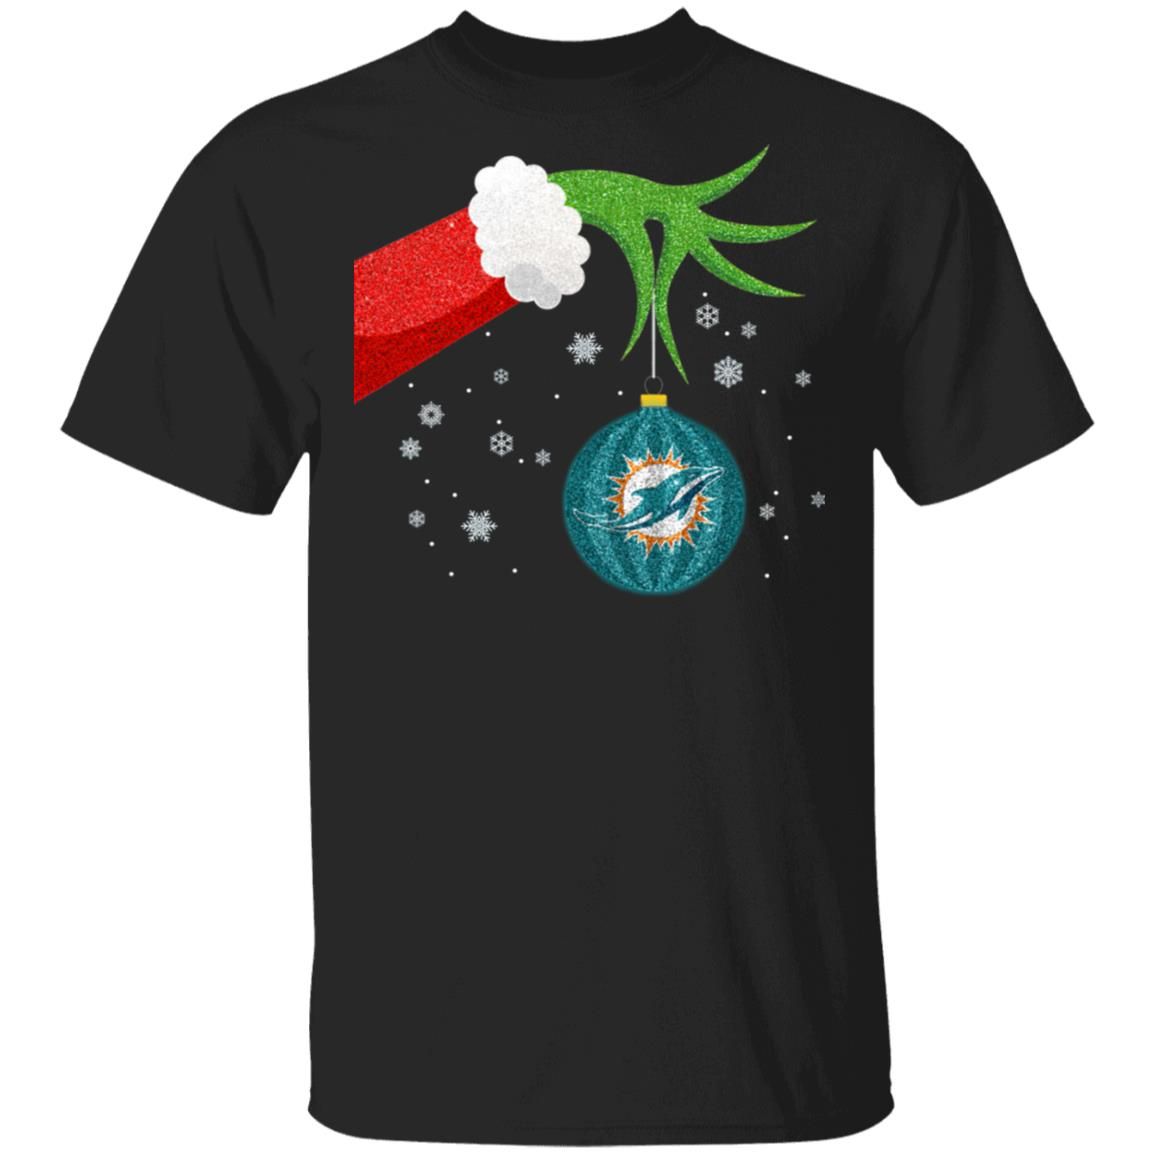 Miami Dolphins Shop - Christmas Ornament Miami Dolphins The Grinch Shirt